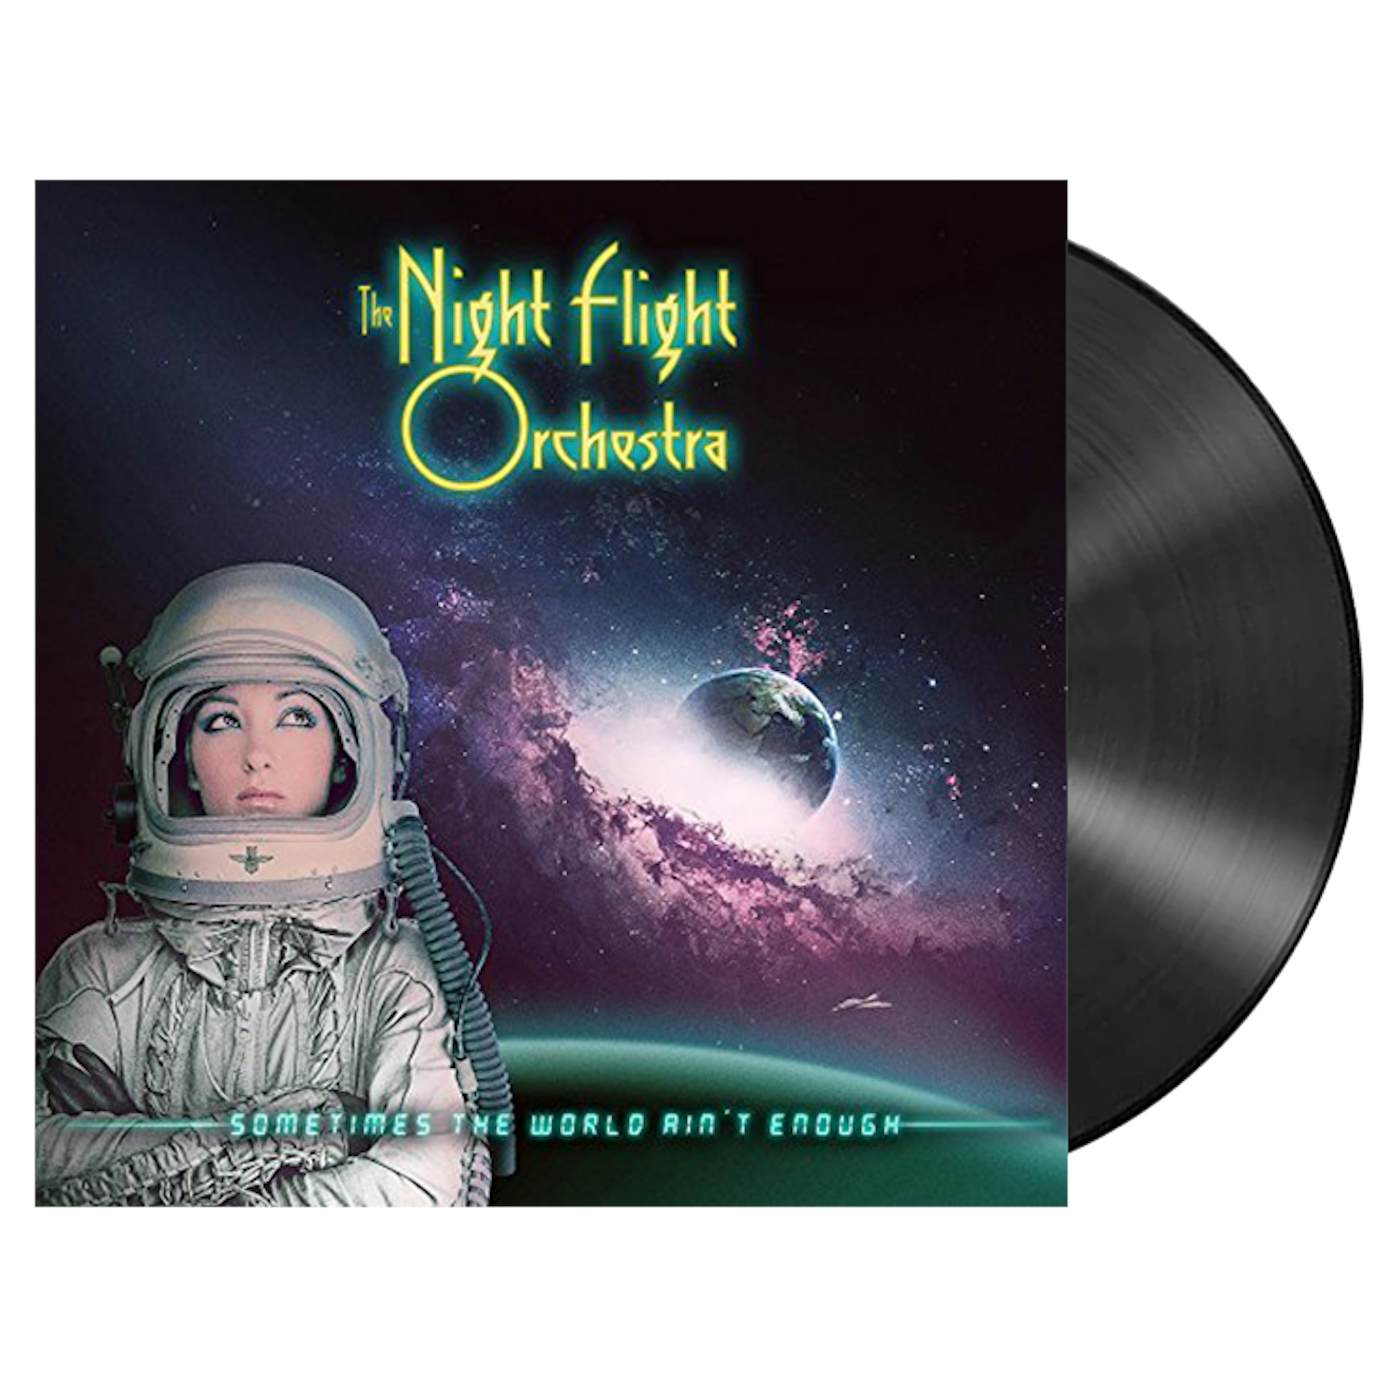 THE NIGHT FLIGHT ORCHESTRA - 'Sometimes the World Ain't Enough' 2xLP (Vinyl)